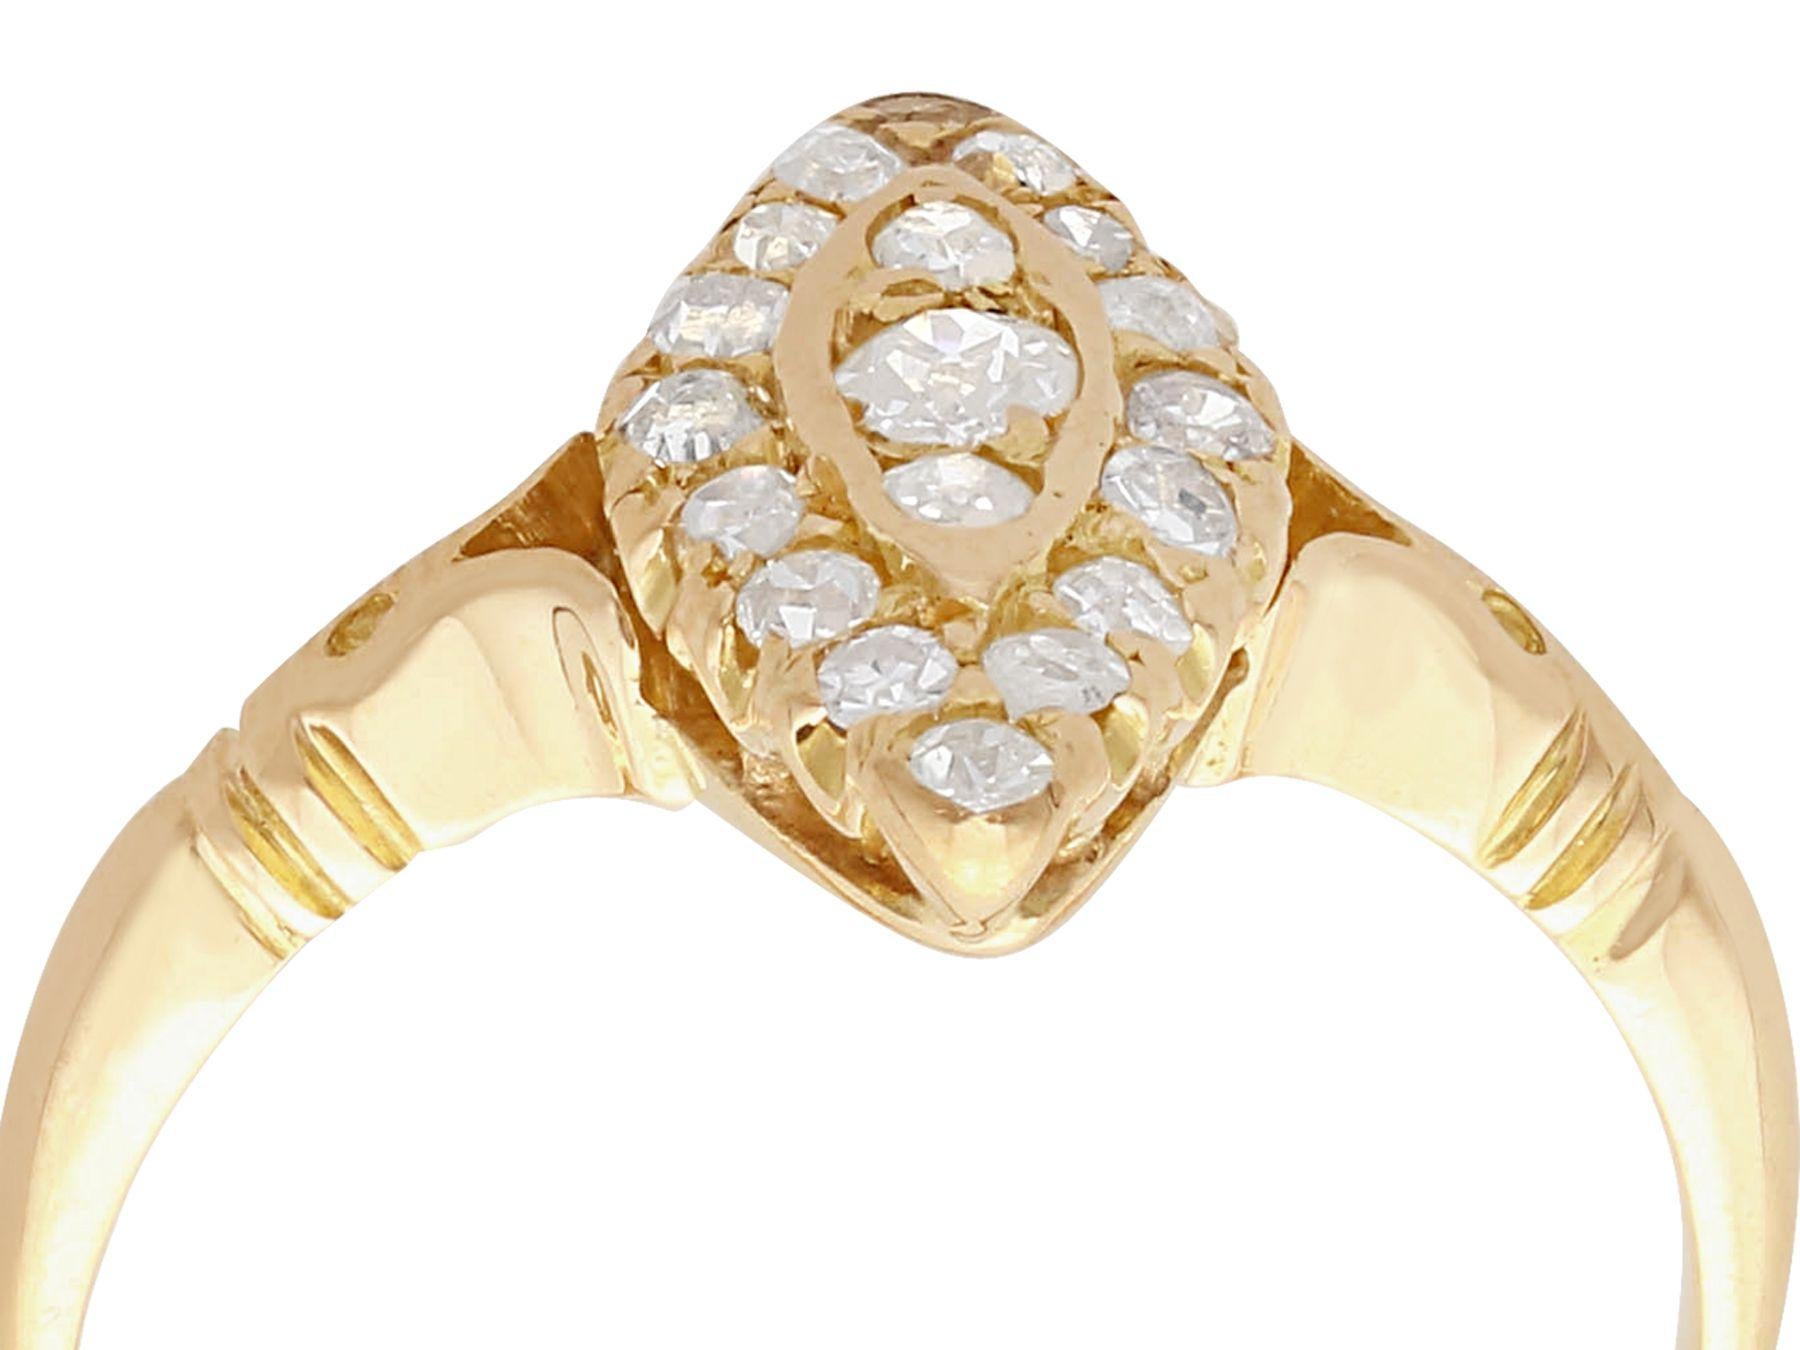 An impressive antique 0.41 carat diamond and 14 karat yellow gold marquise shaped cocktail ring; part of our diverse antique jewelry and estate jewelry collections.

This fine and impressive marquise shaped diamond cluster ring has been crafted in